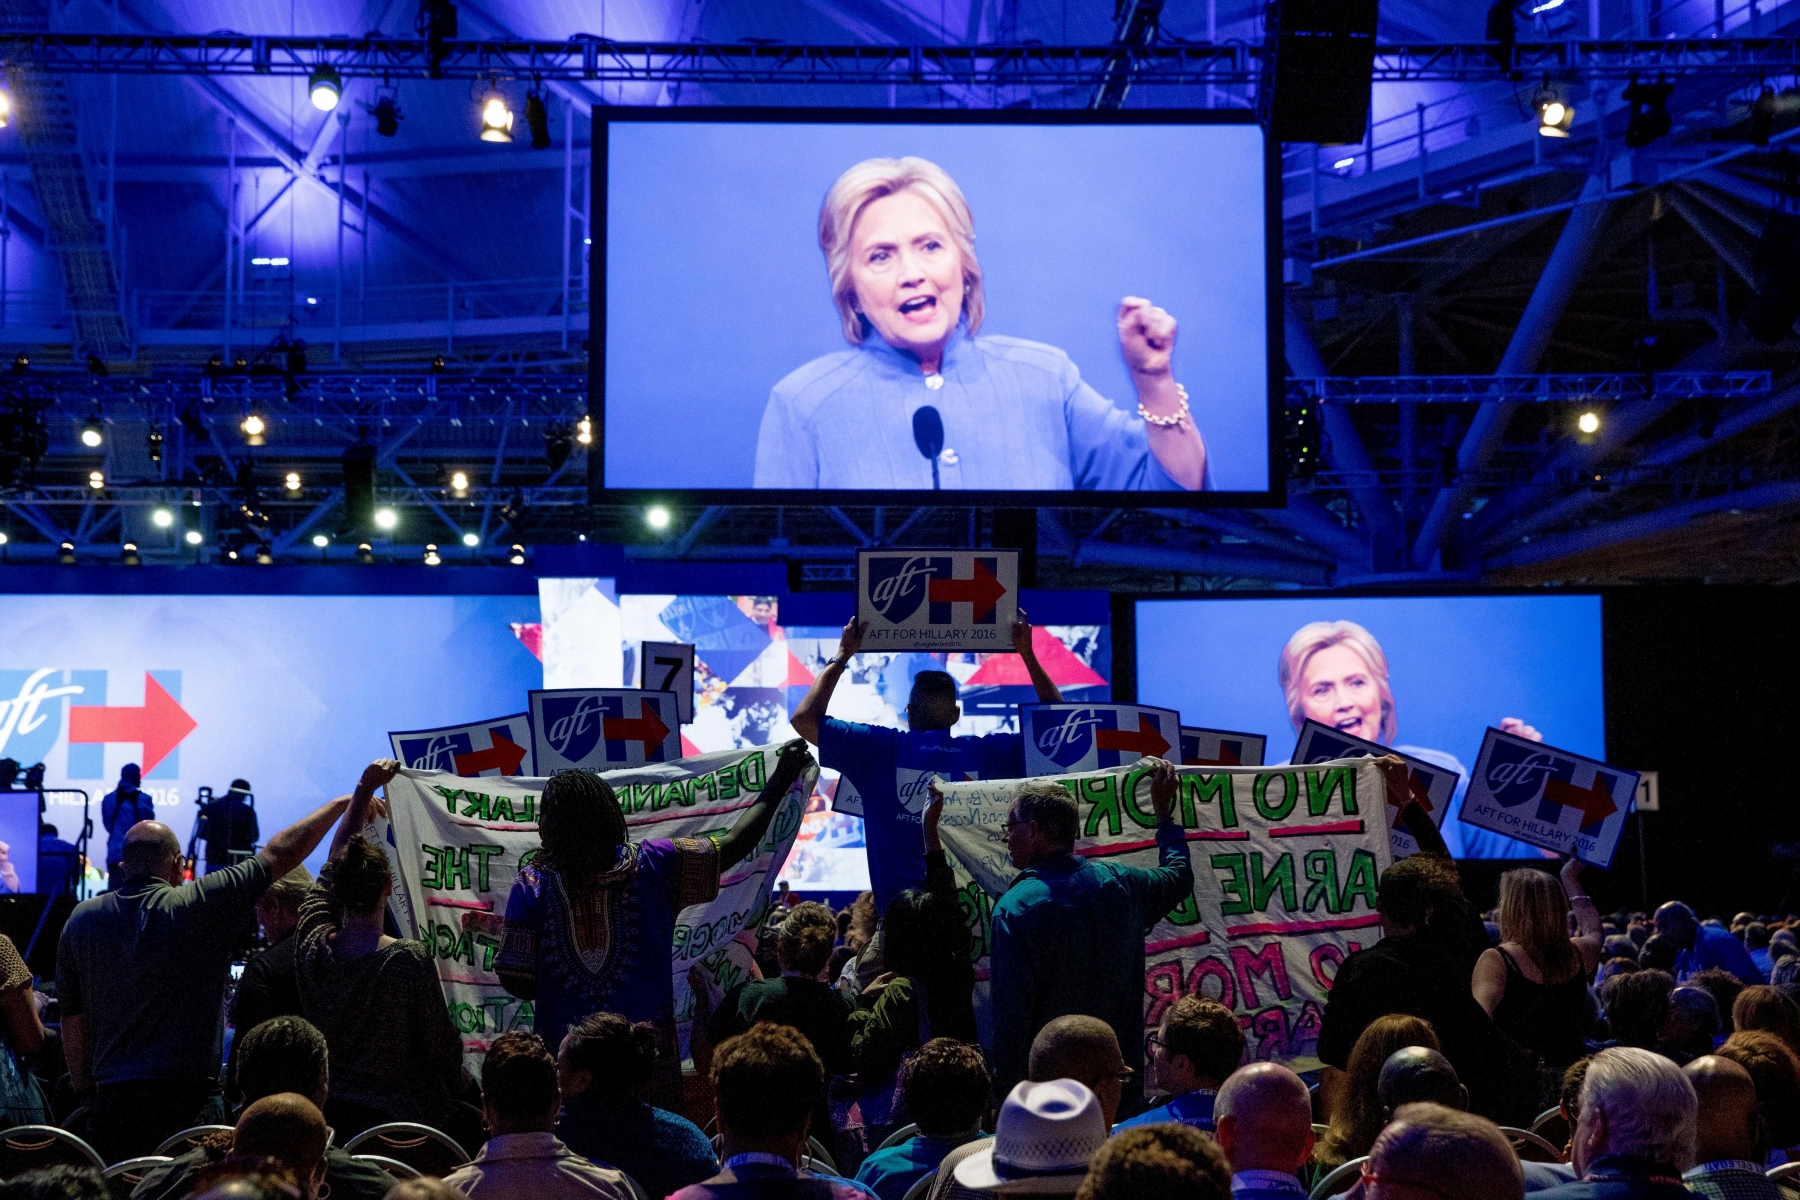 Clinton supporters try to block signs held by protesters as they disrupt Democratic presidential candidate Hillary Clinton as she speaks at the American Federation of Teachers convention at the Minneapolis Convention Center in Minneapolis, Monday, July 18, 2016. (AP Photo/Andrew Harnik) Campaign 2016 Clinton